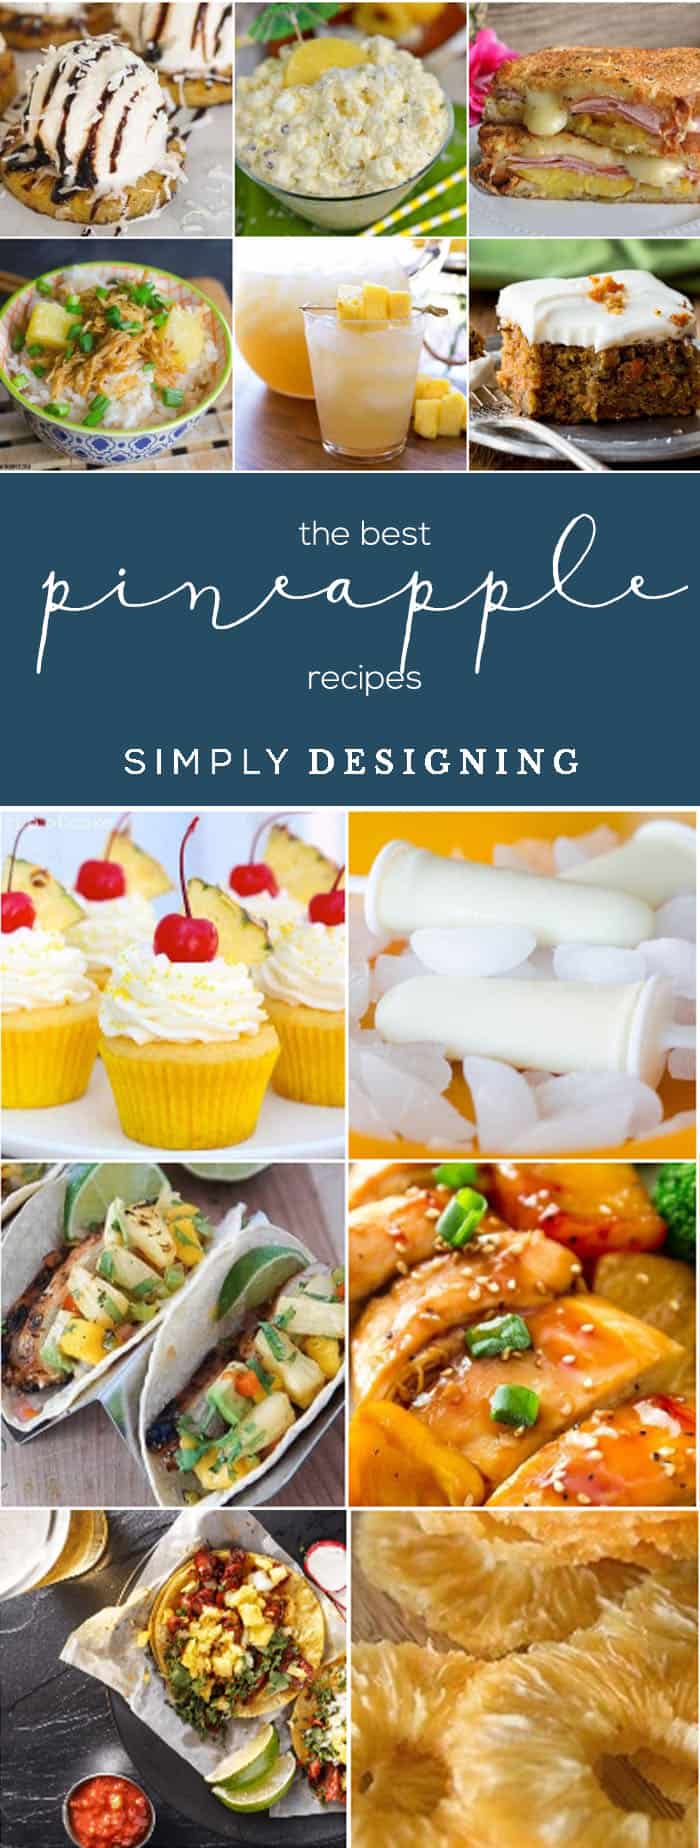 the best pineapple recipes pin 25+ Pineapple Recipes for the Perfect Summer Treat 28 chicken pot pie recipe